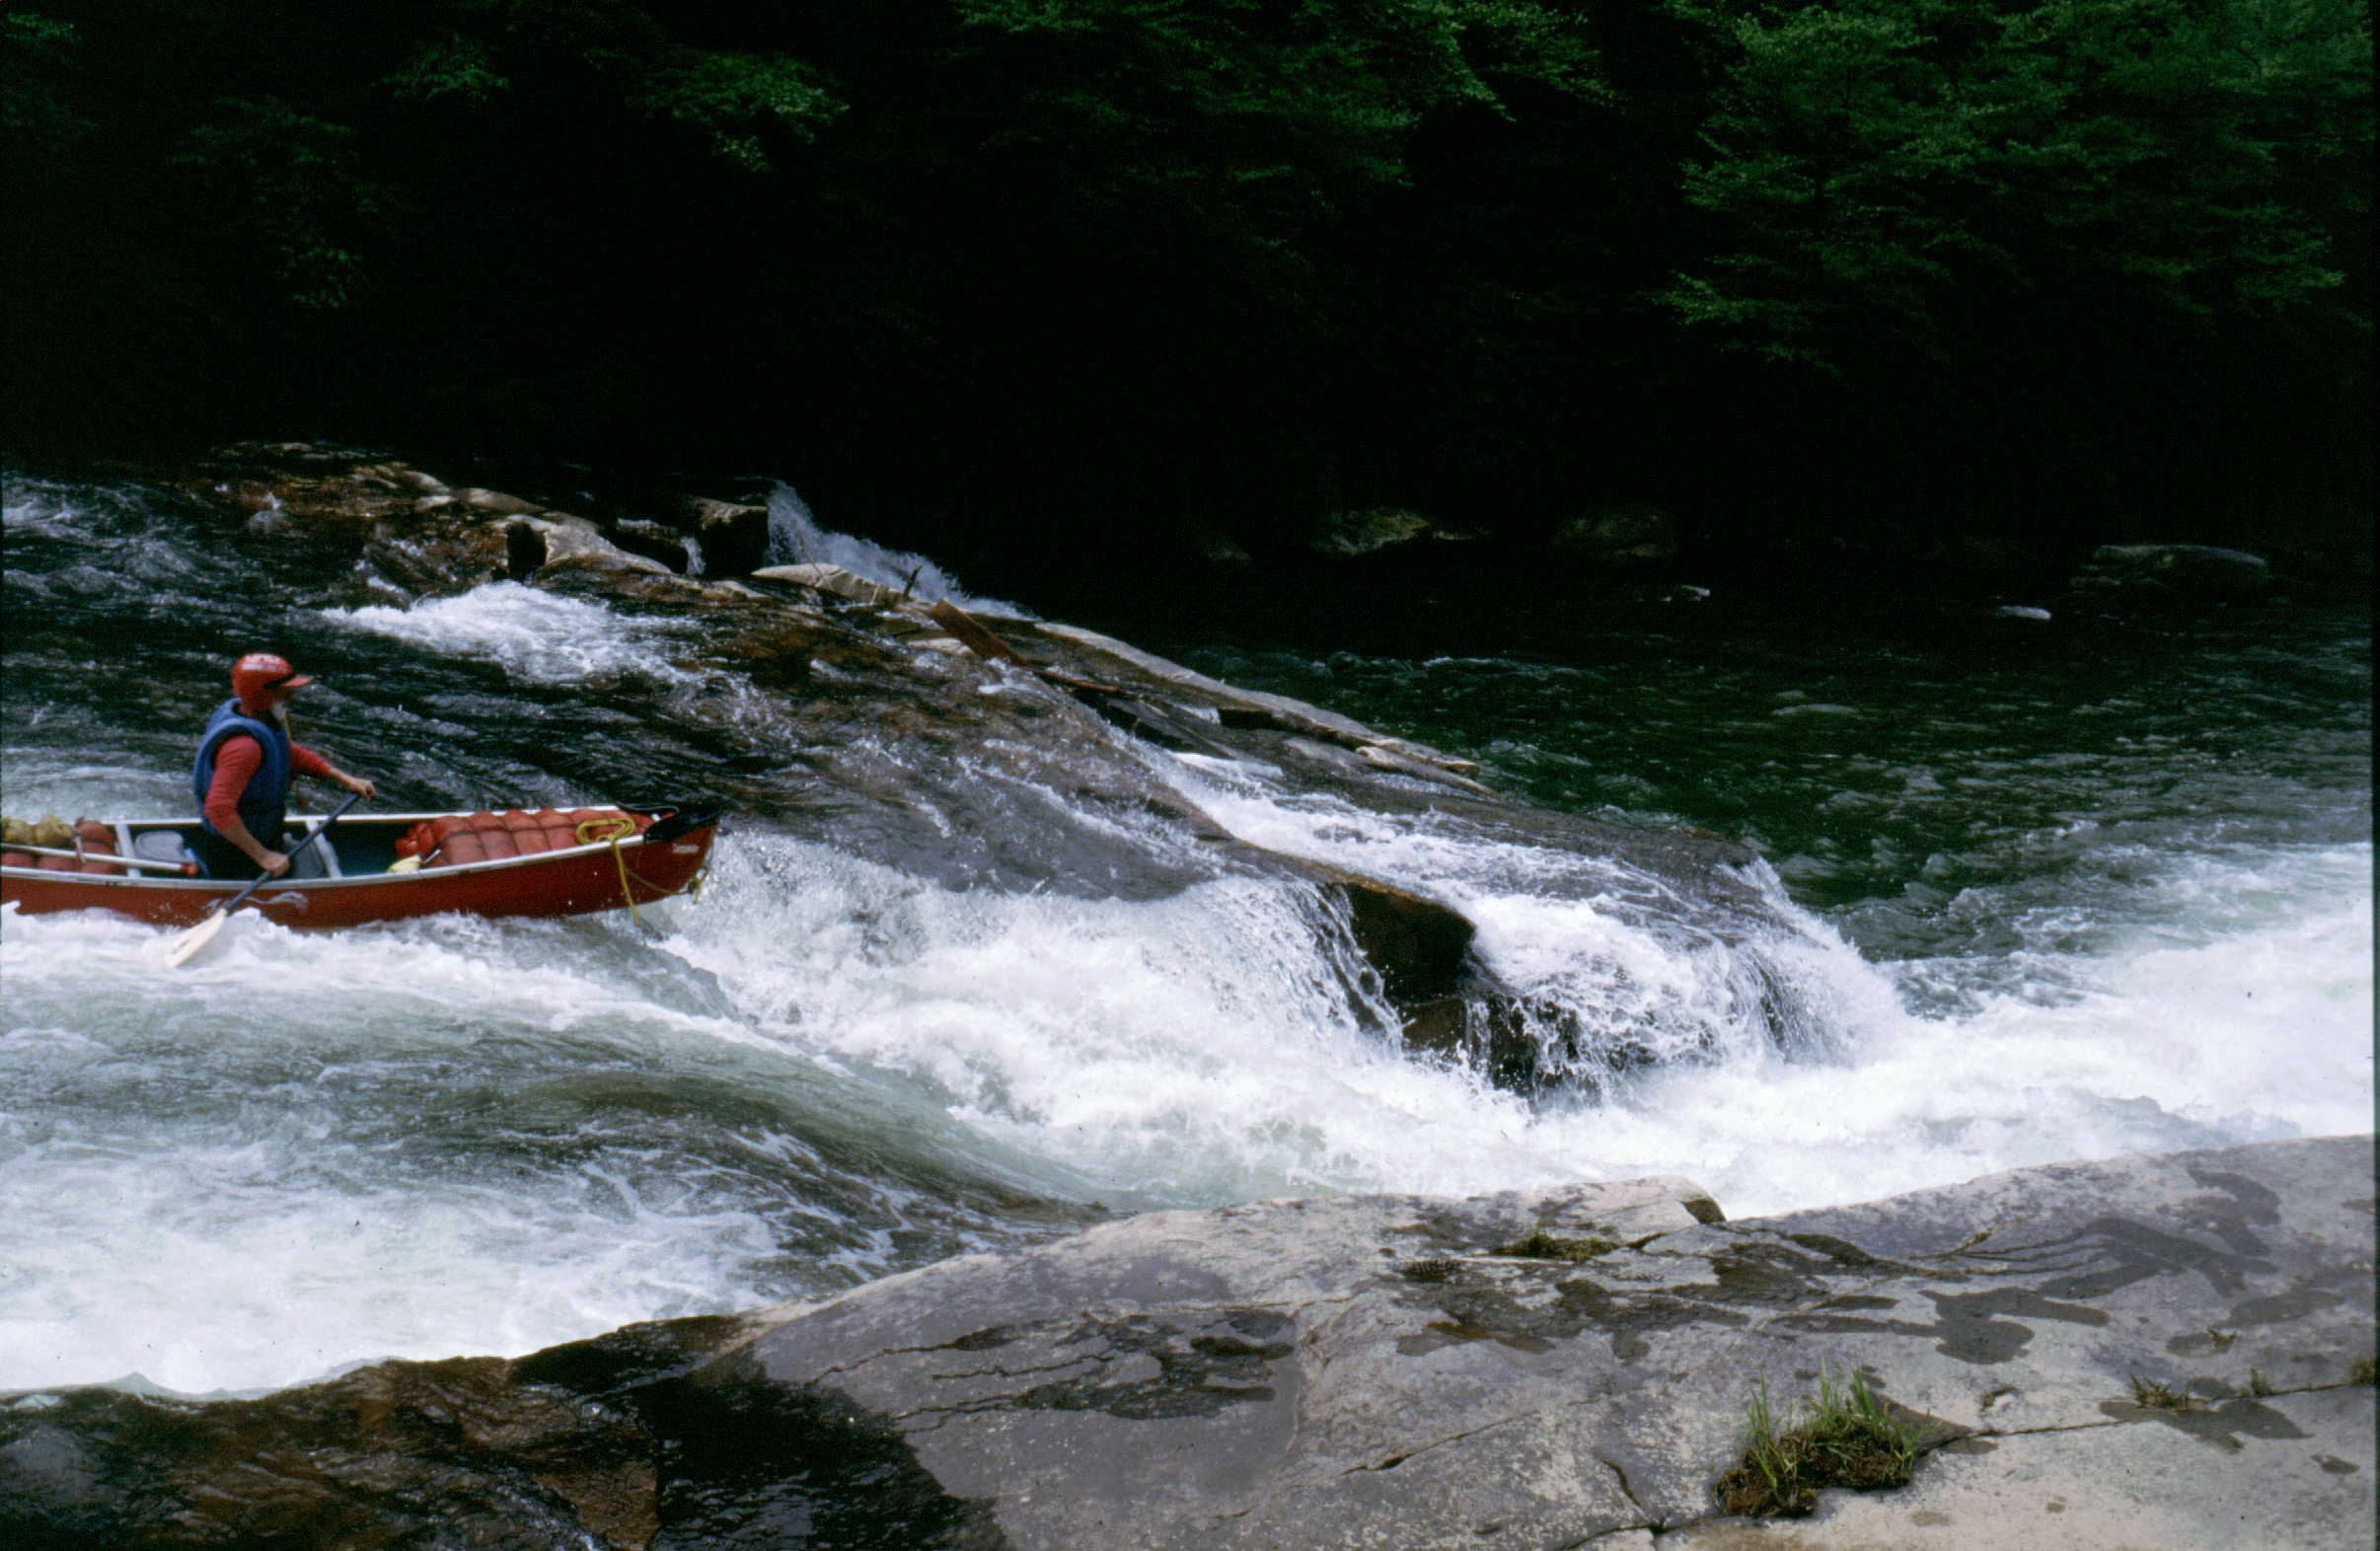 Rick Koller at Zoom Flume on the Lower Big Sandy (Photo by Bob Maxey - 5/25/02)